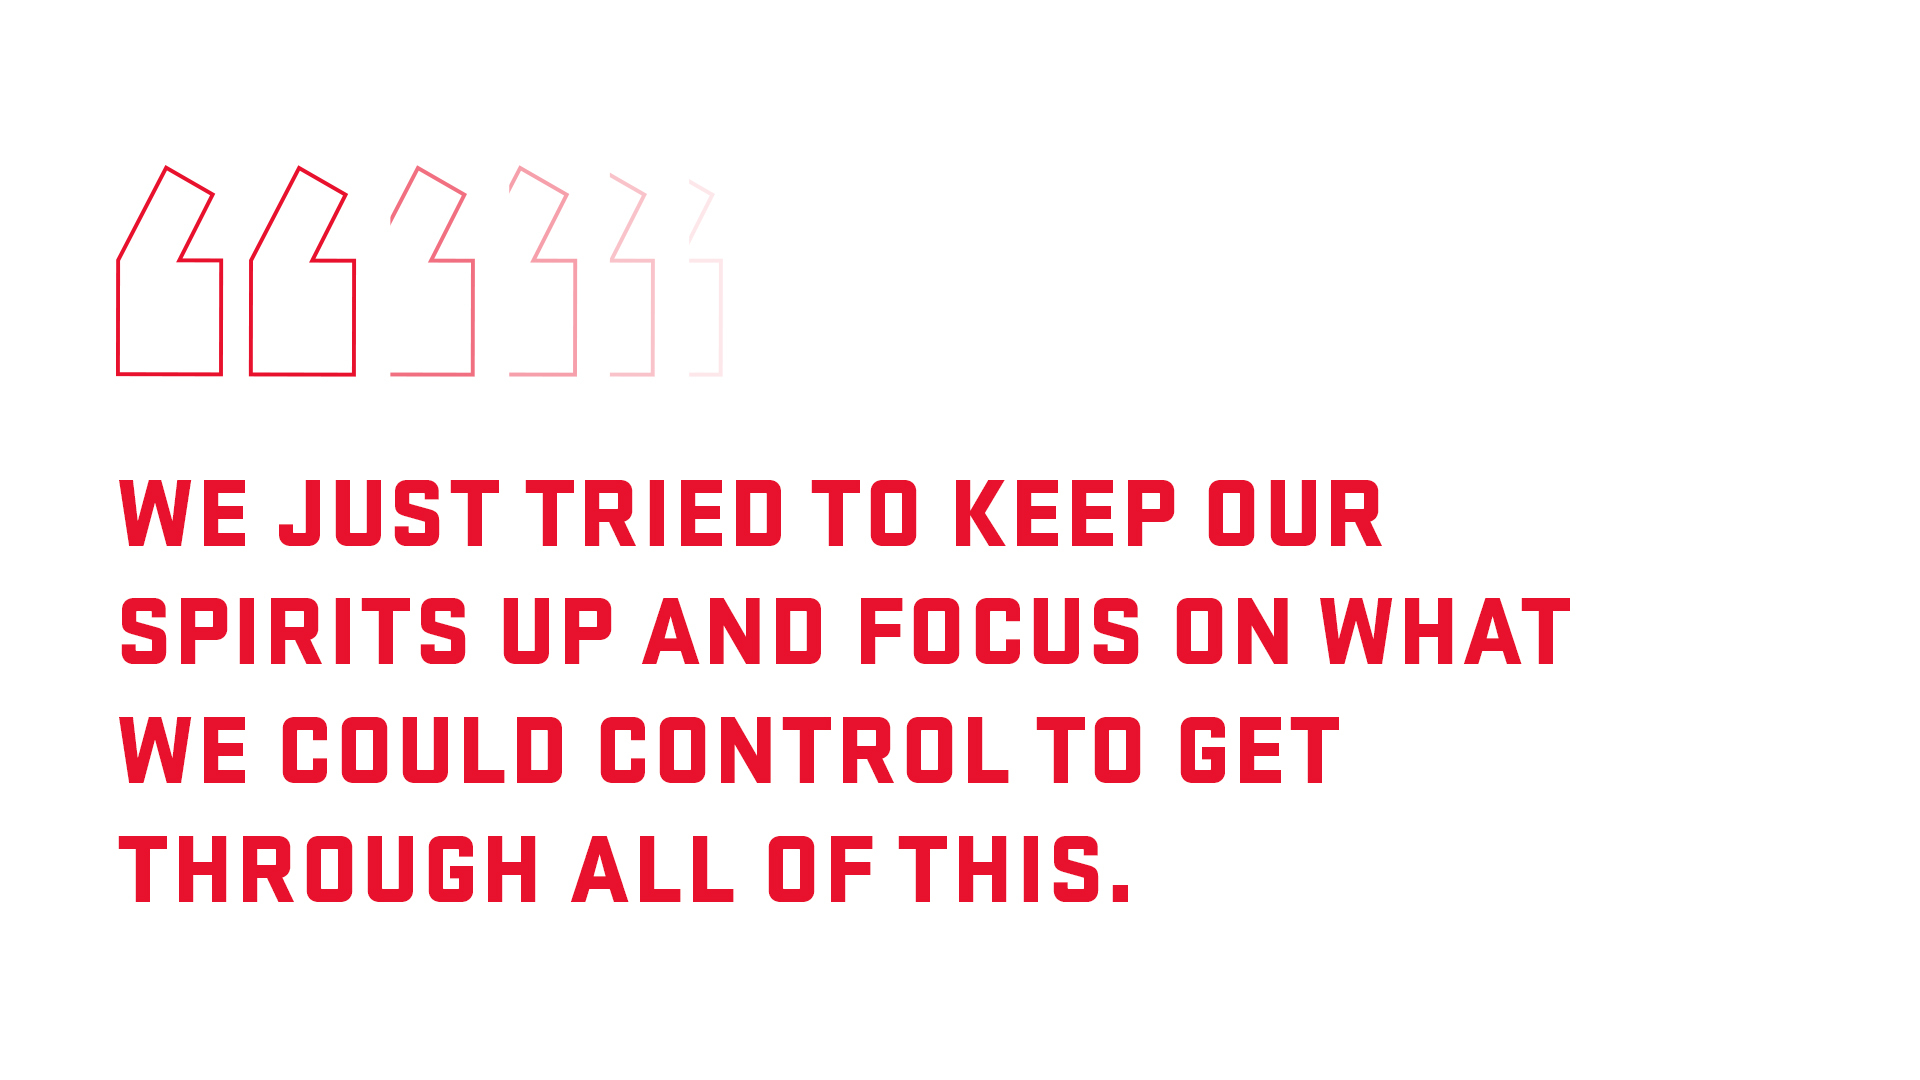 Block quote: We just tried to keep out spirits up and focus on what we could control to get through all of this. 